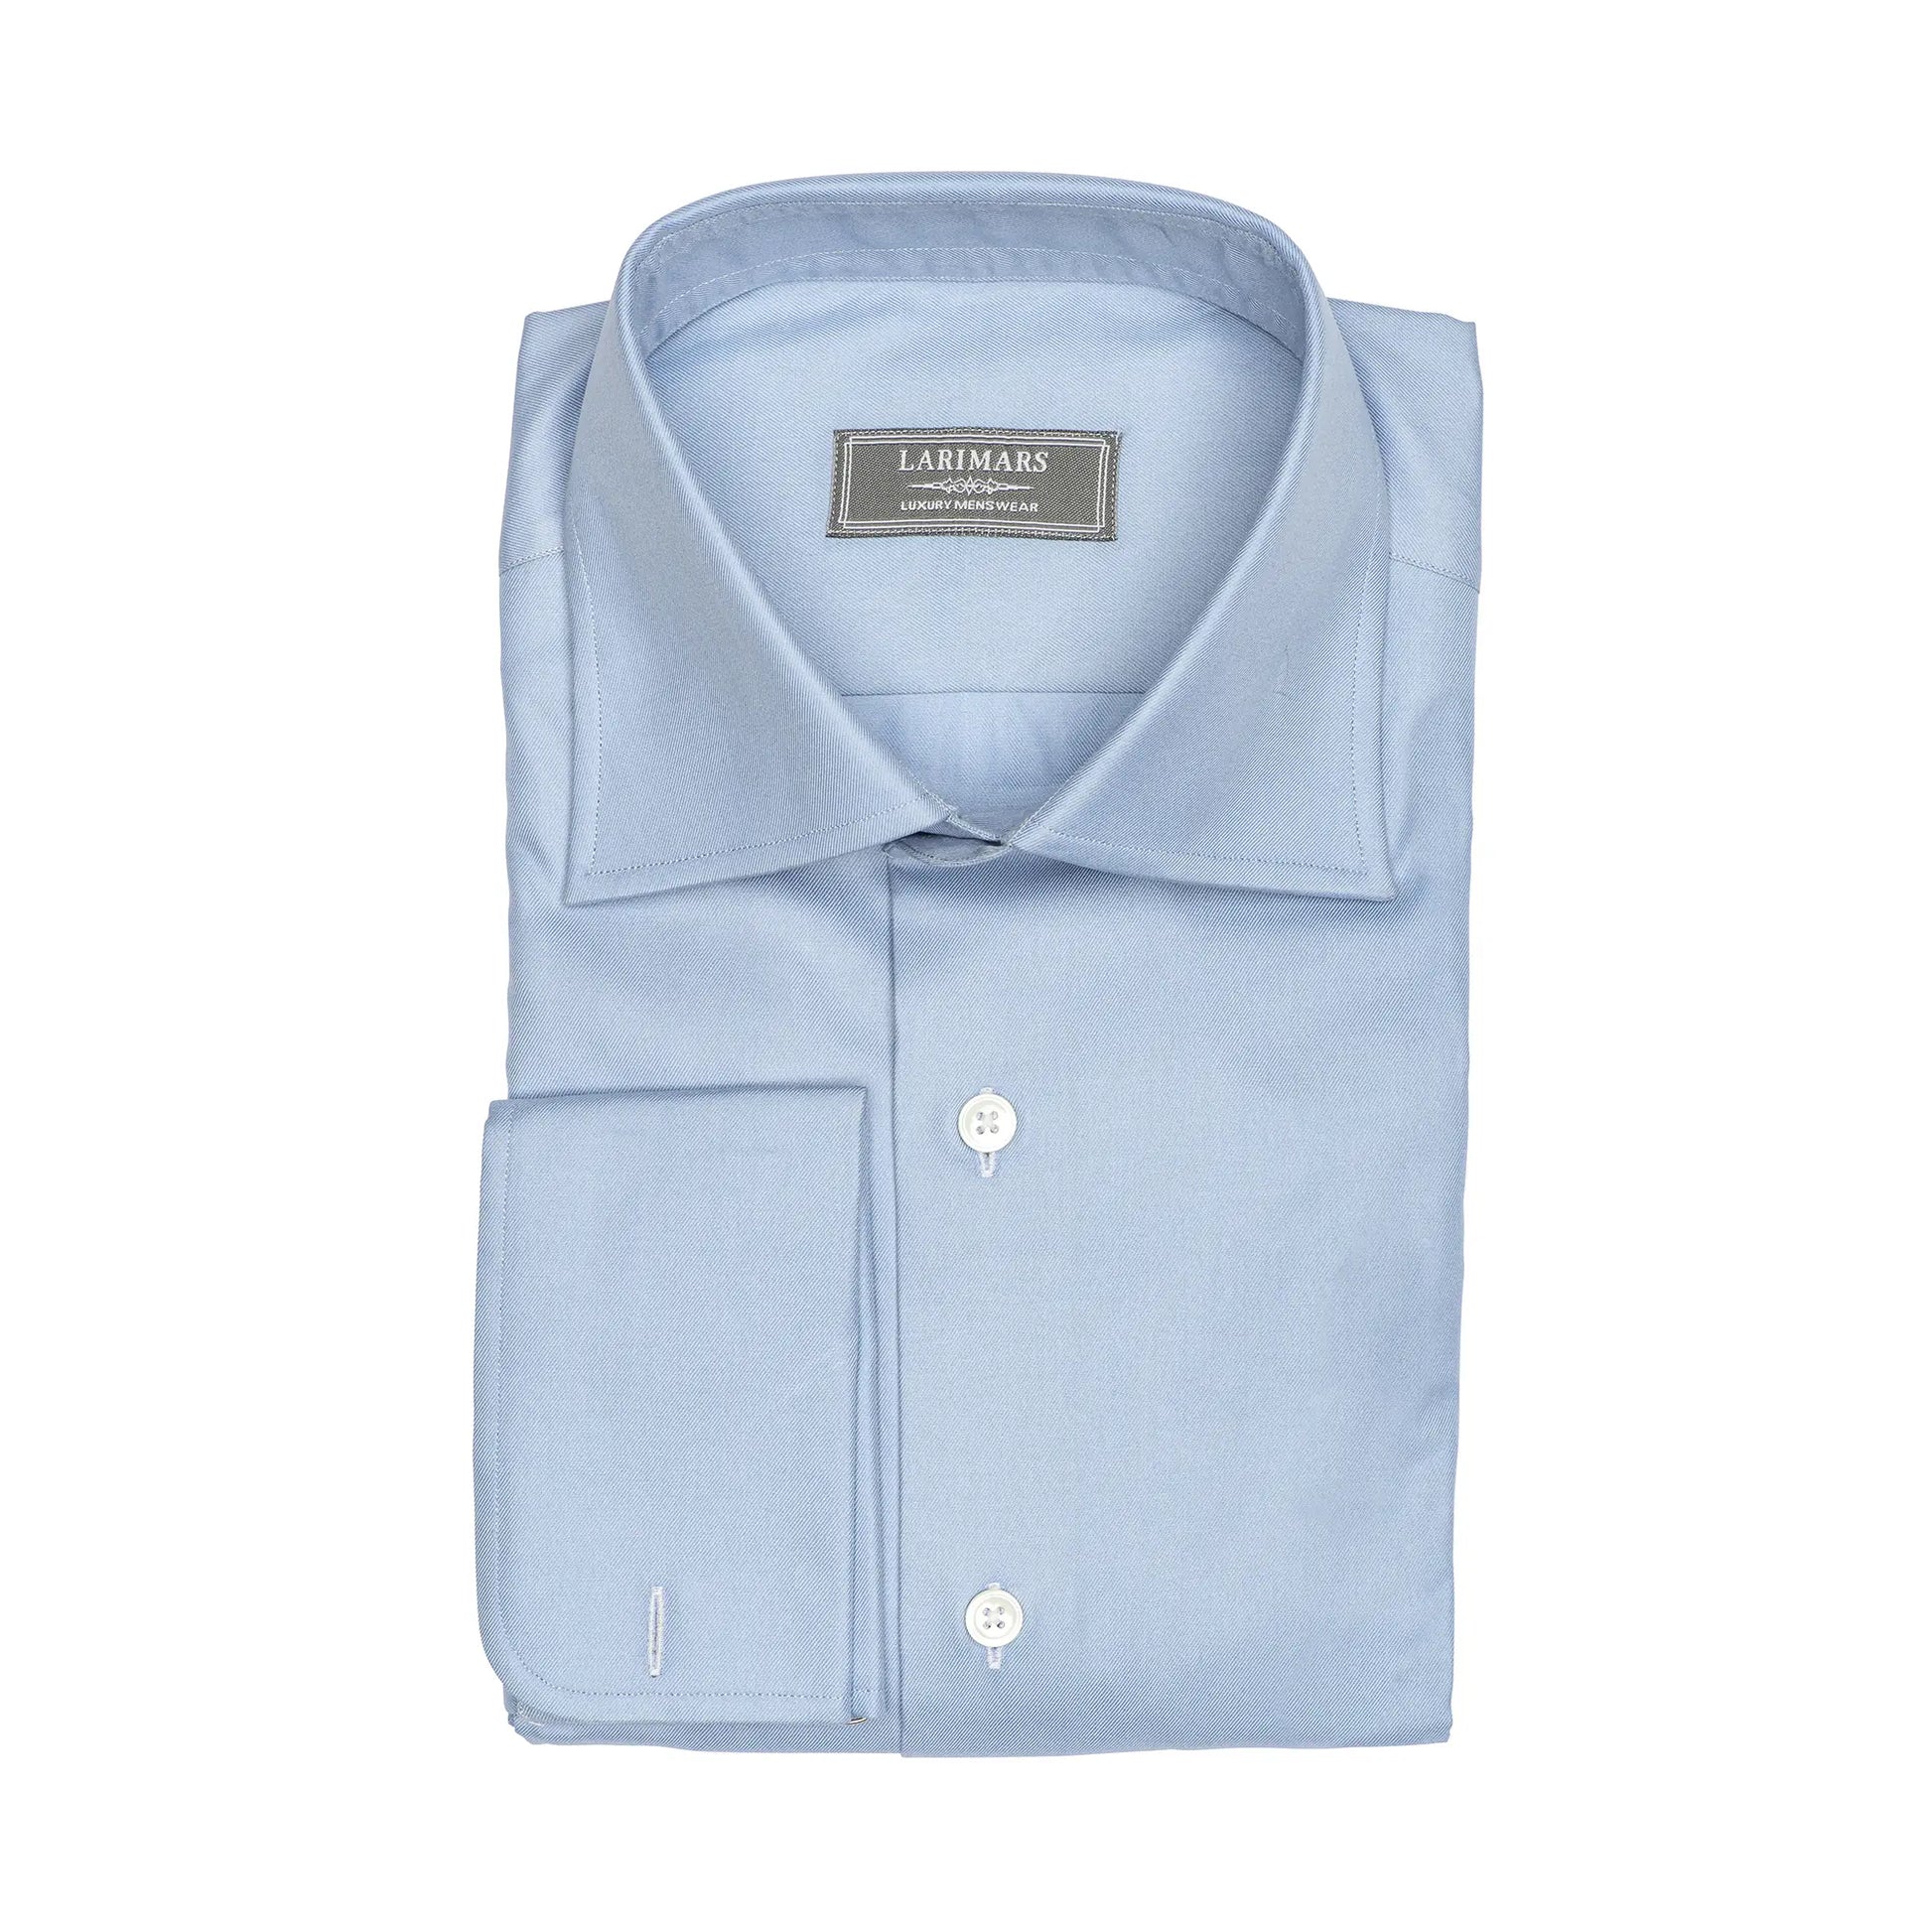 Classic Blue Fine Twill - Larimars Clothing Men's Formal and casual wear shirts